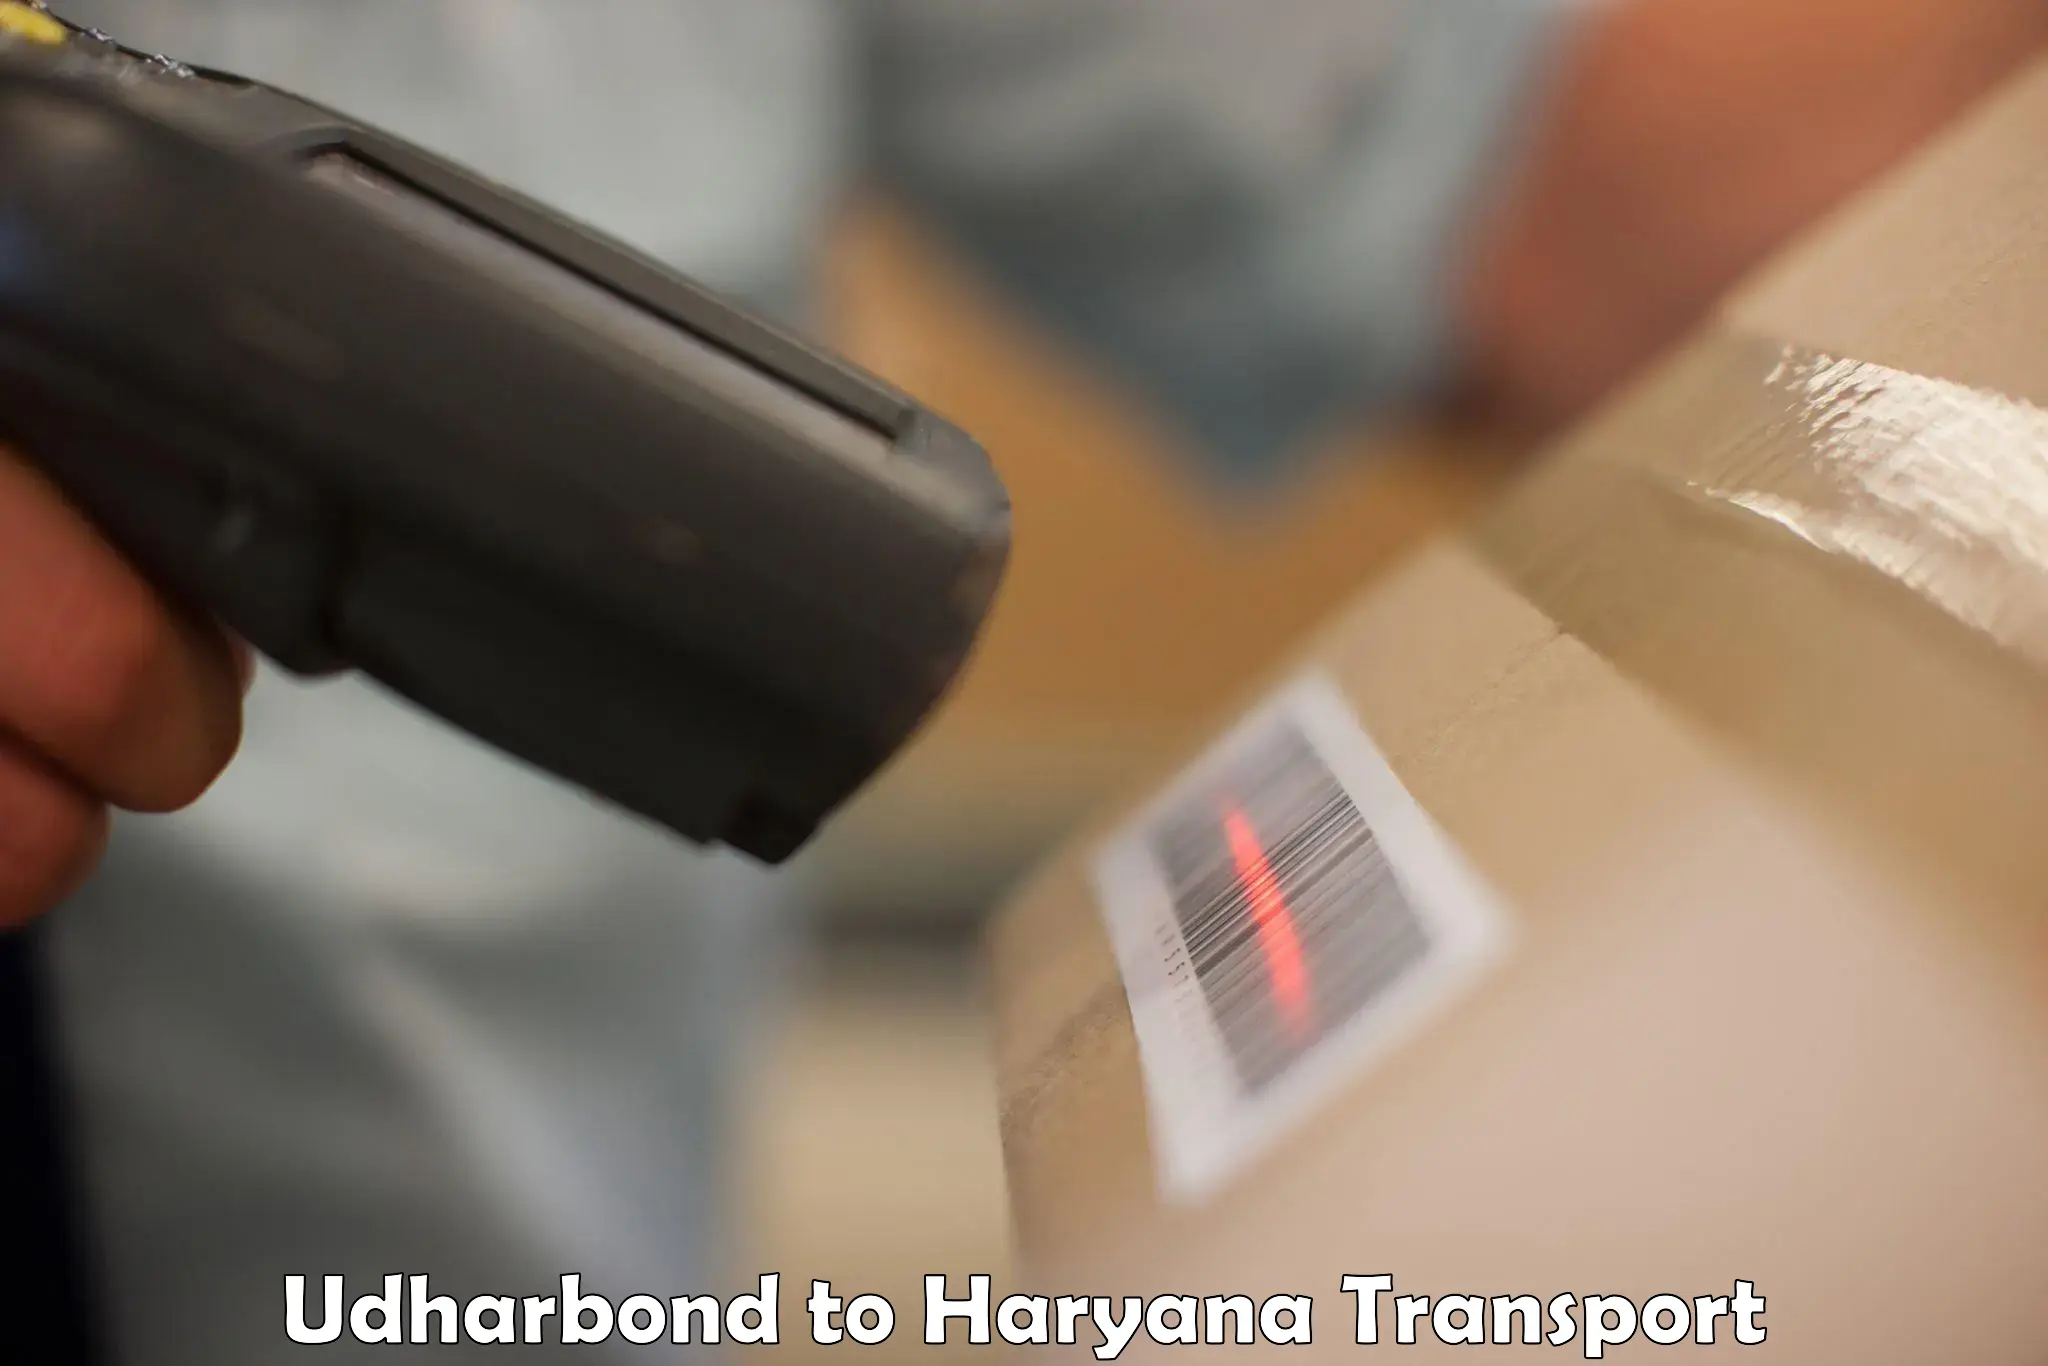 Nearby transport service Udharbond to Haryana